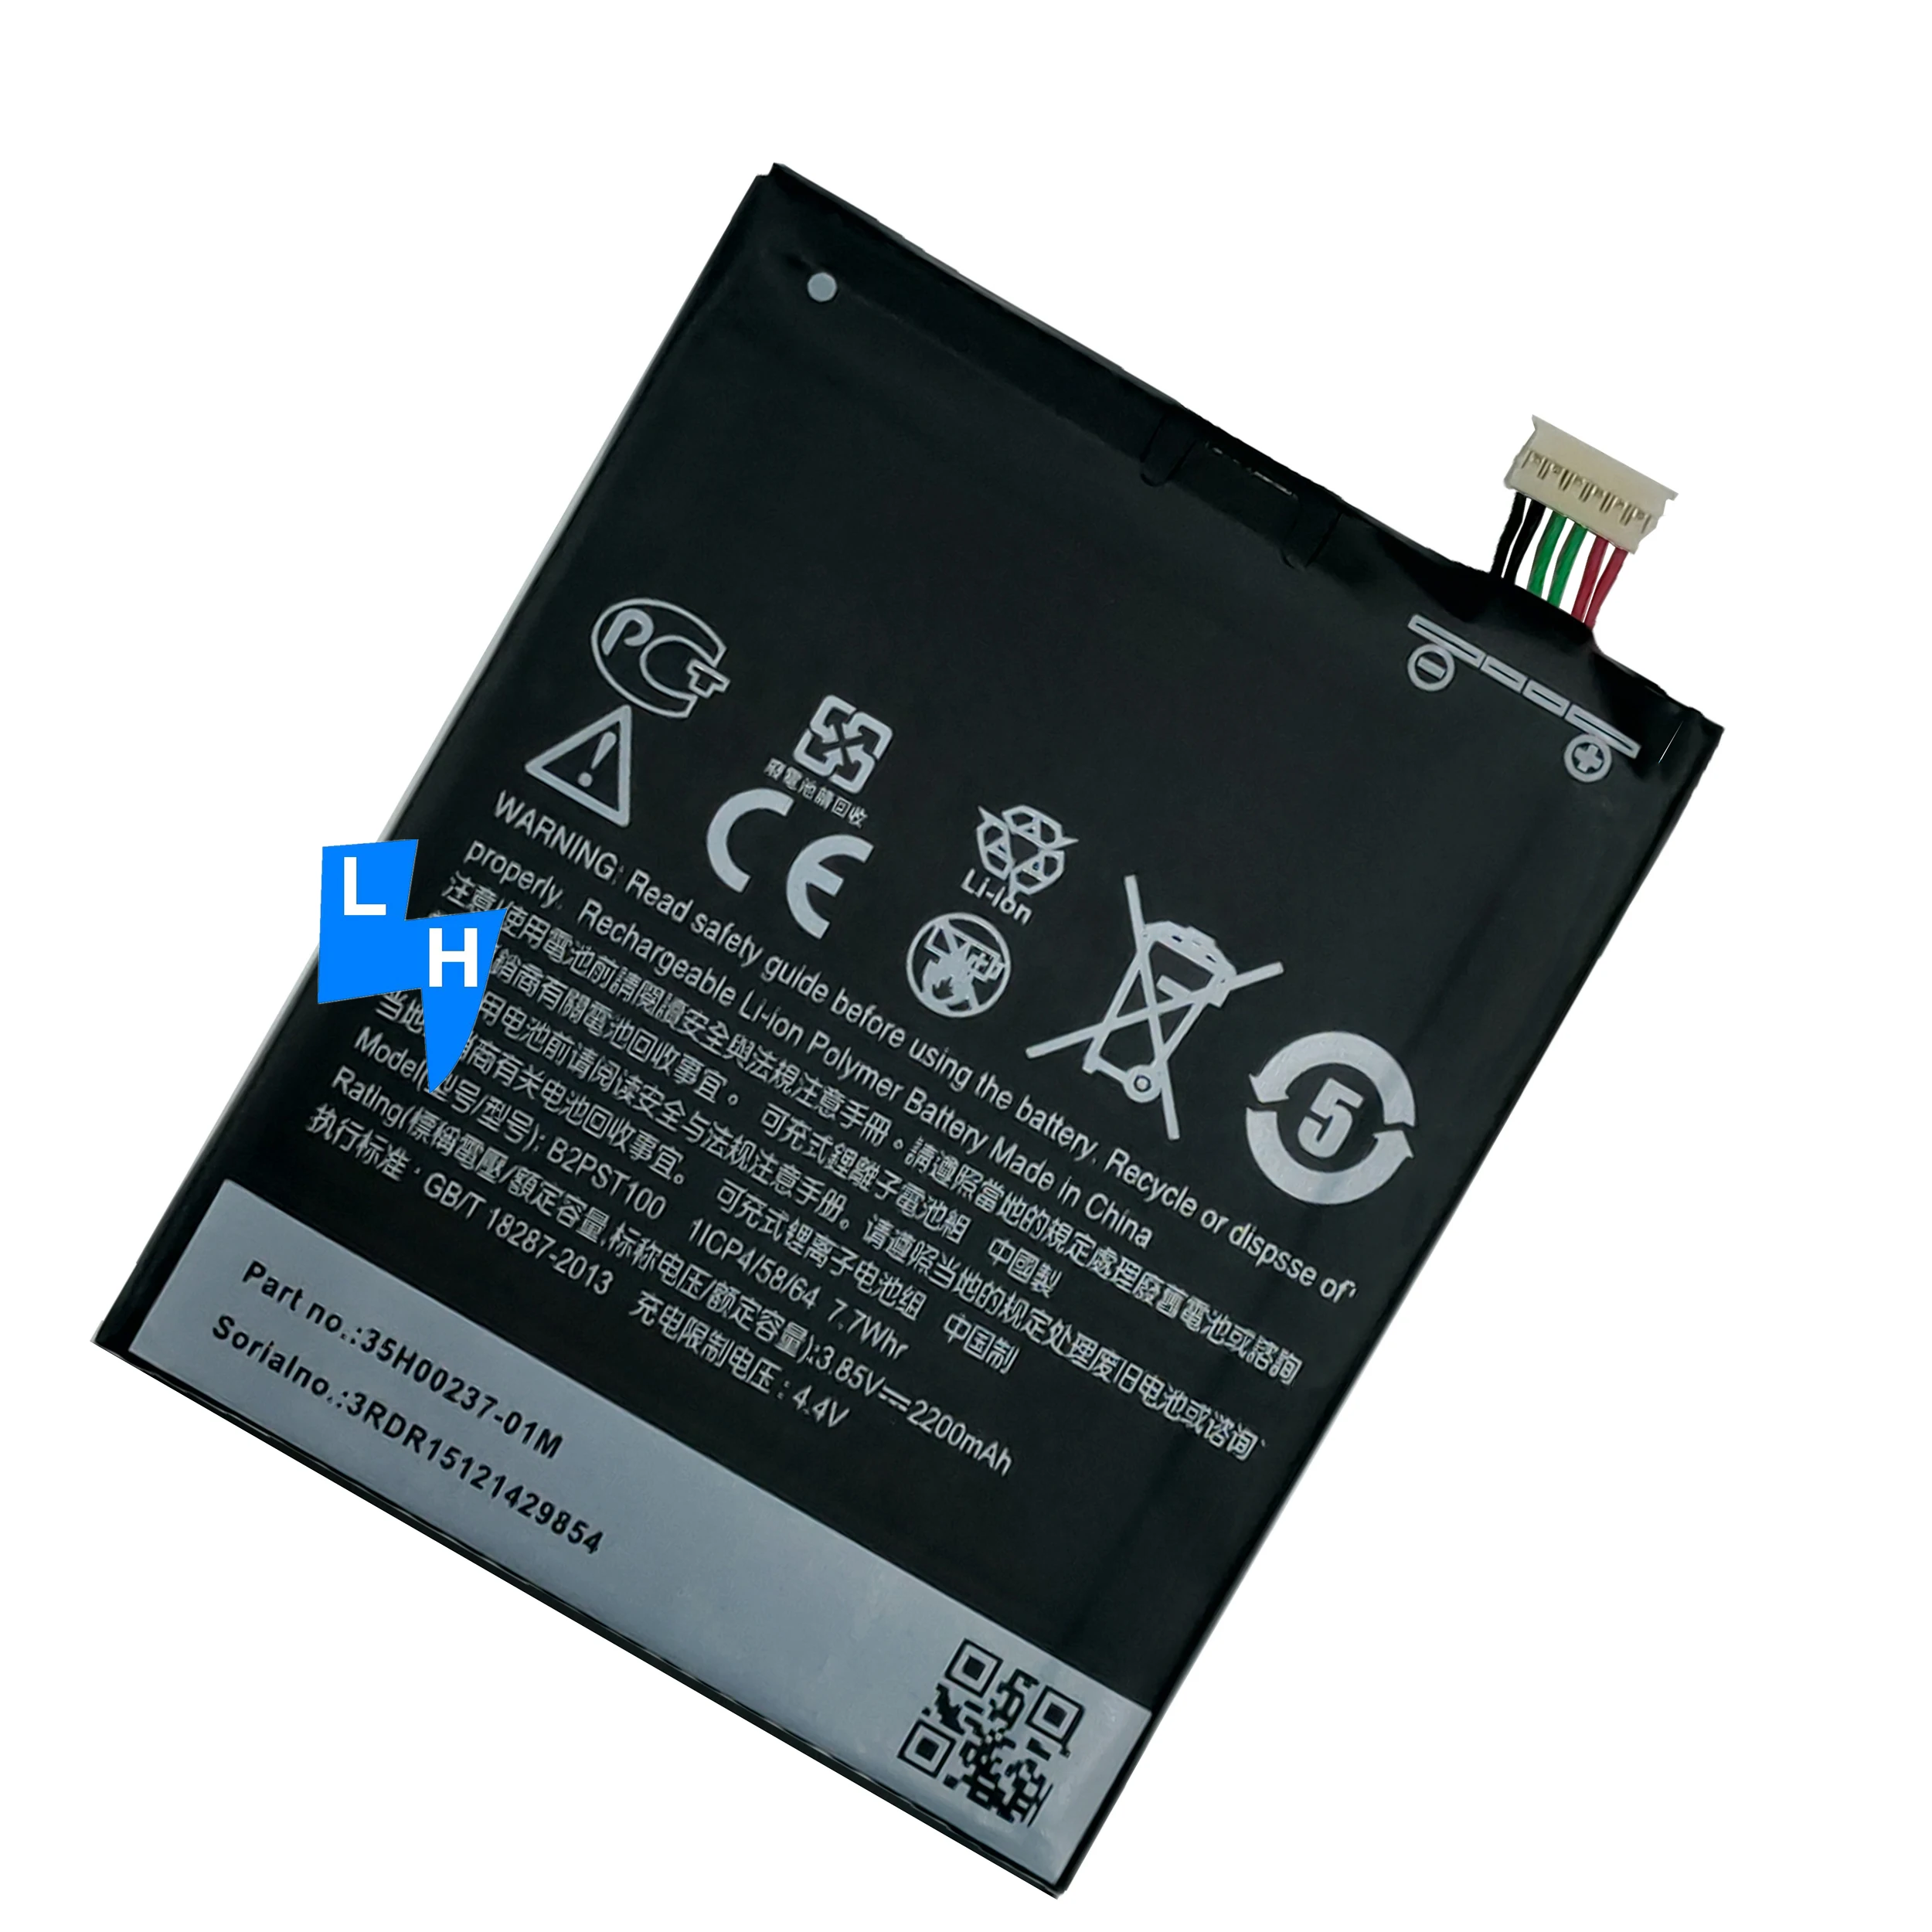 konvertering Post Foran dig Wholesale 2200mAh B2PST100 Desire 630 D628 /530/650 mobile phone battery  for HTC Desire 626 battery From m.alibaba.com